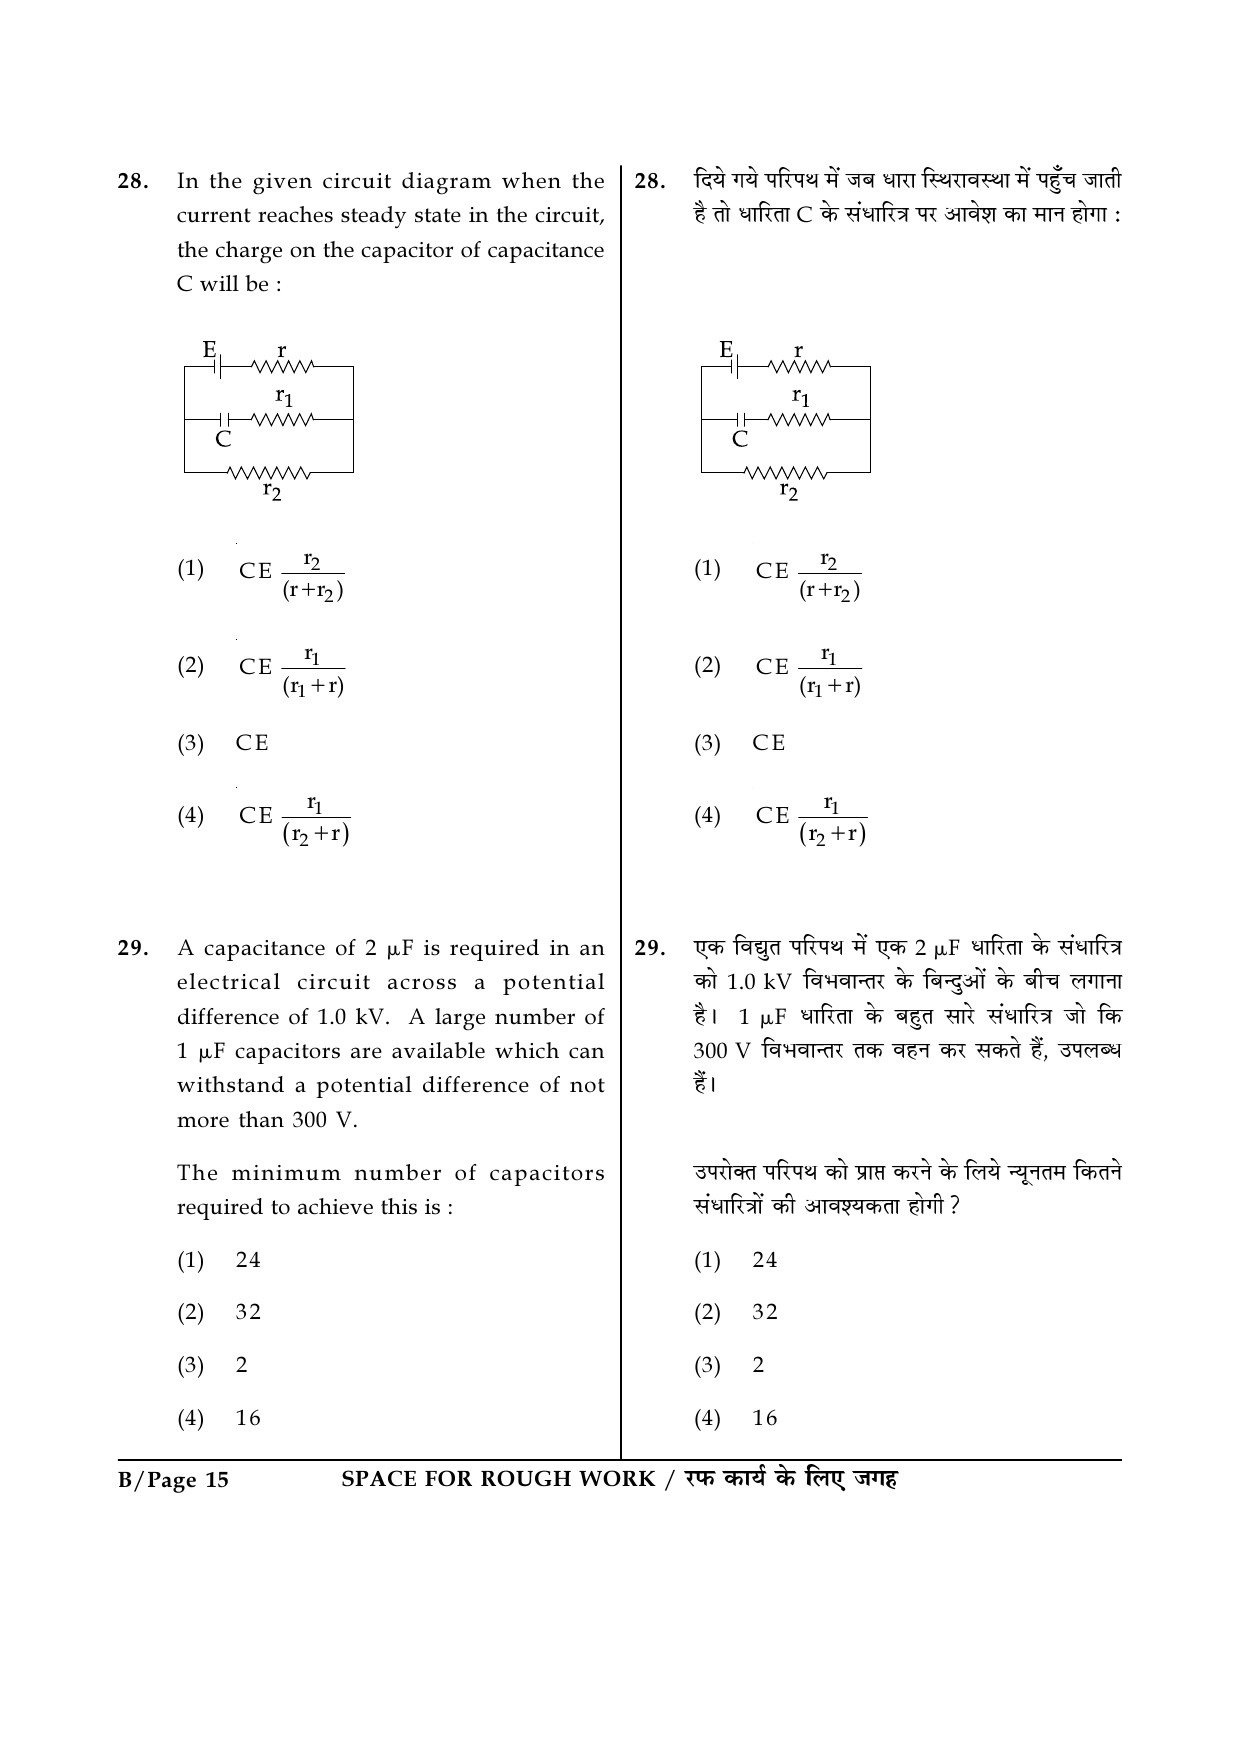 JEE Main Exam Question Paper 2017 Booklet B 15